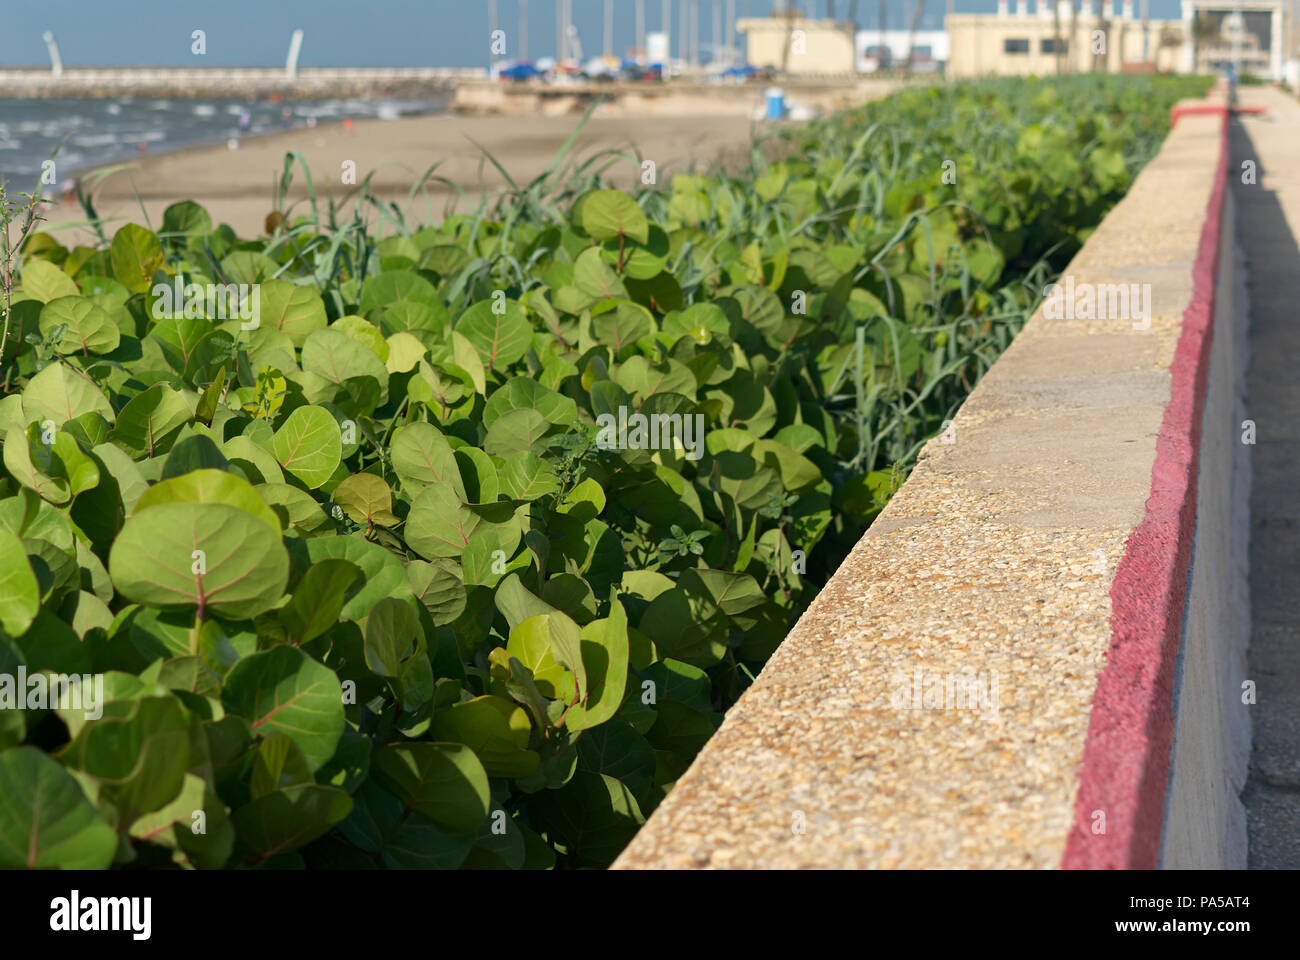 COATZACOALCOS, VER/MEXICO: A small patch of mangrove planted along the boardwalk to keep sand from flying into the streets and prevent beach erosion Stock Photo